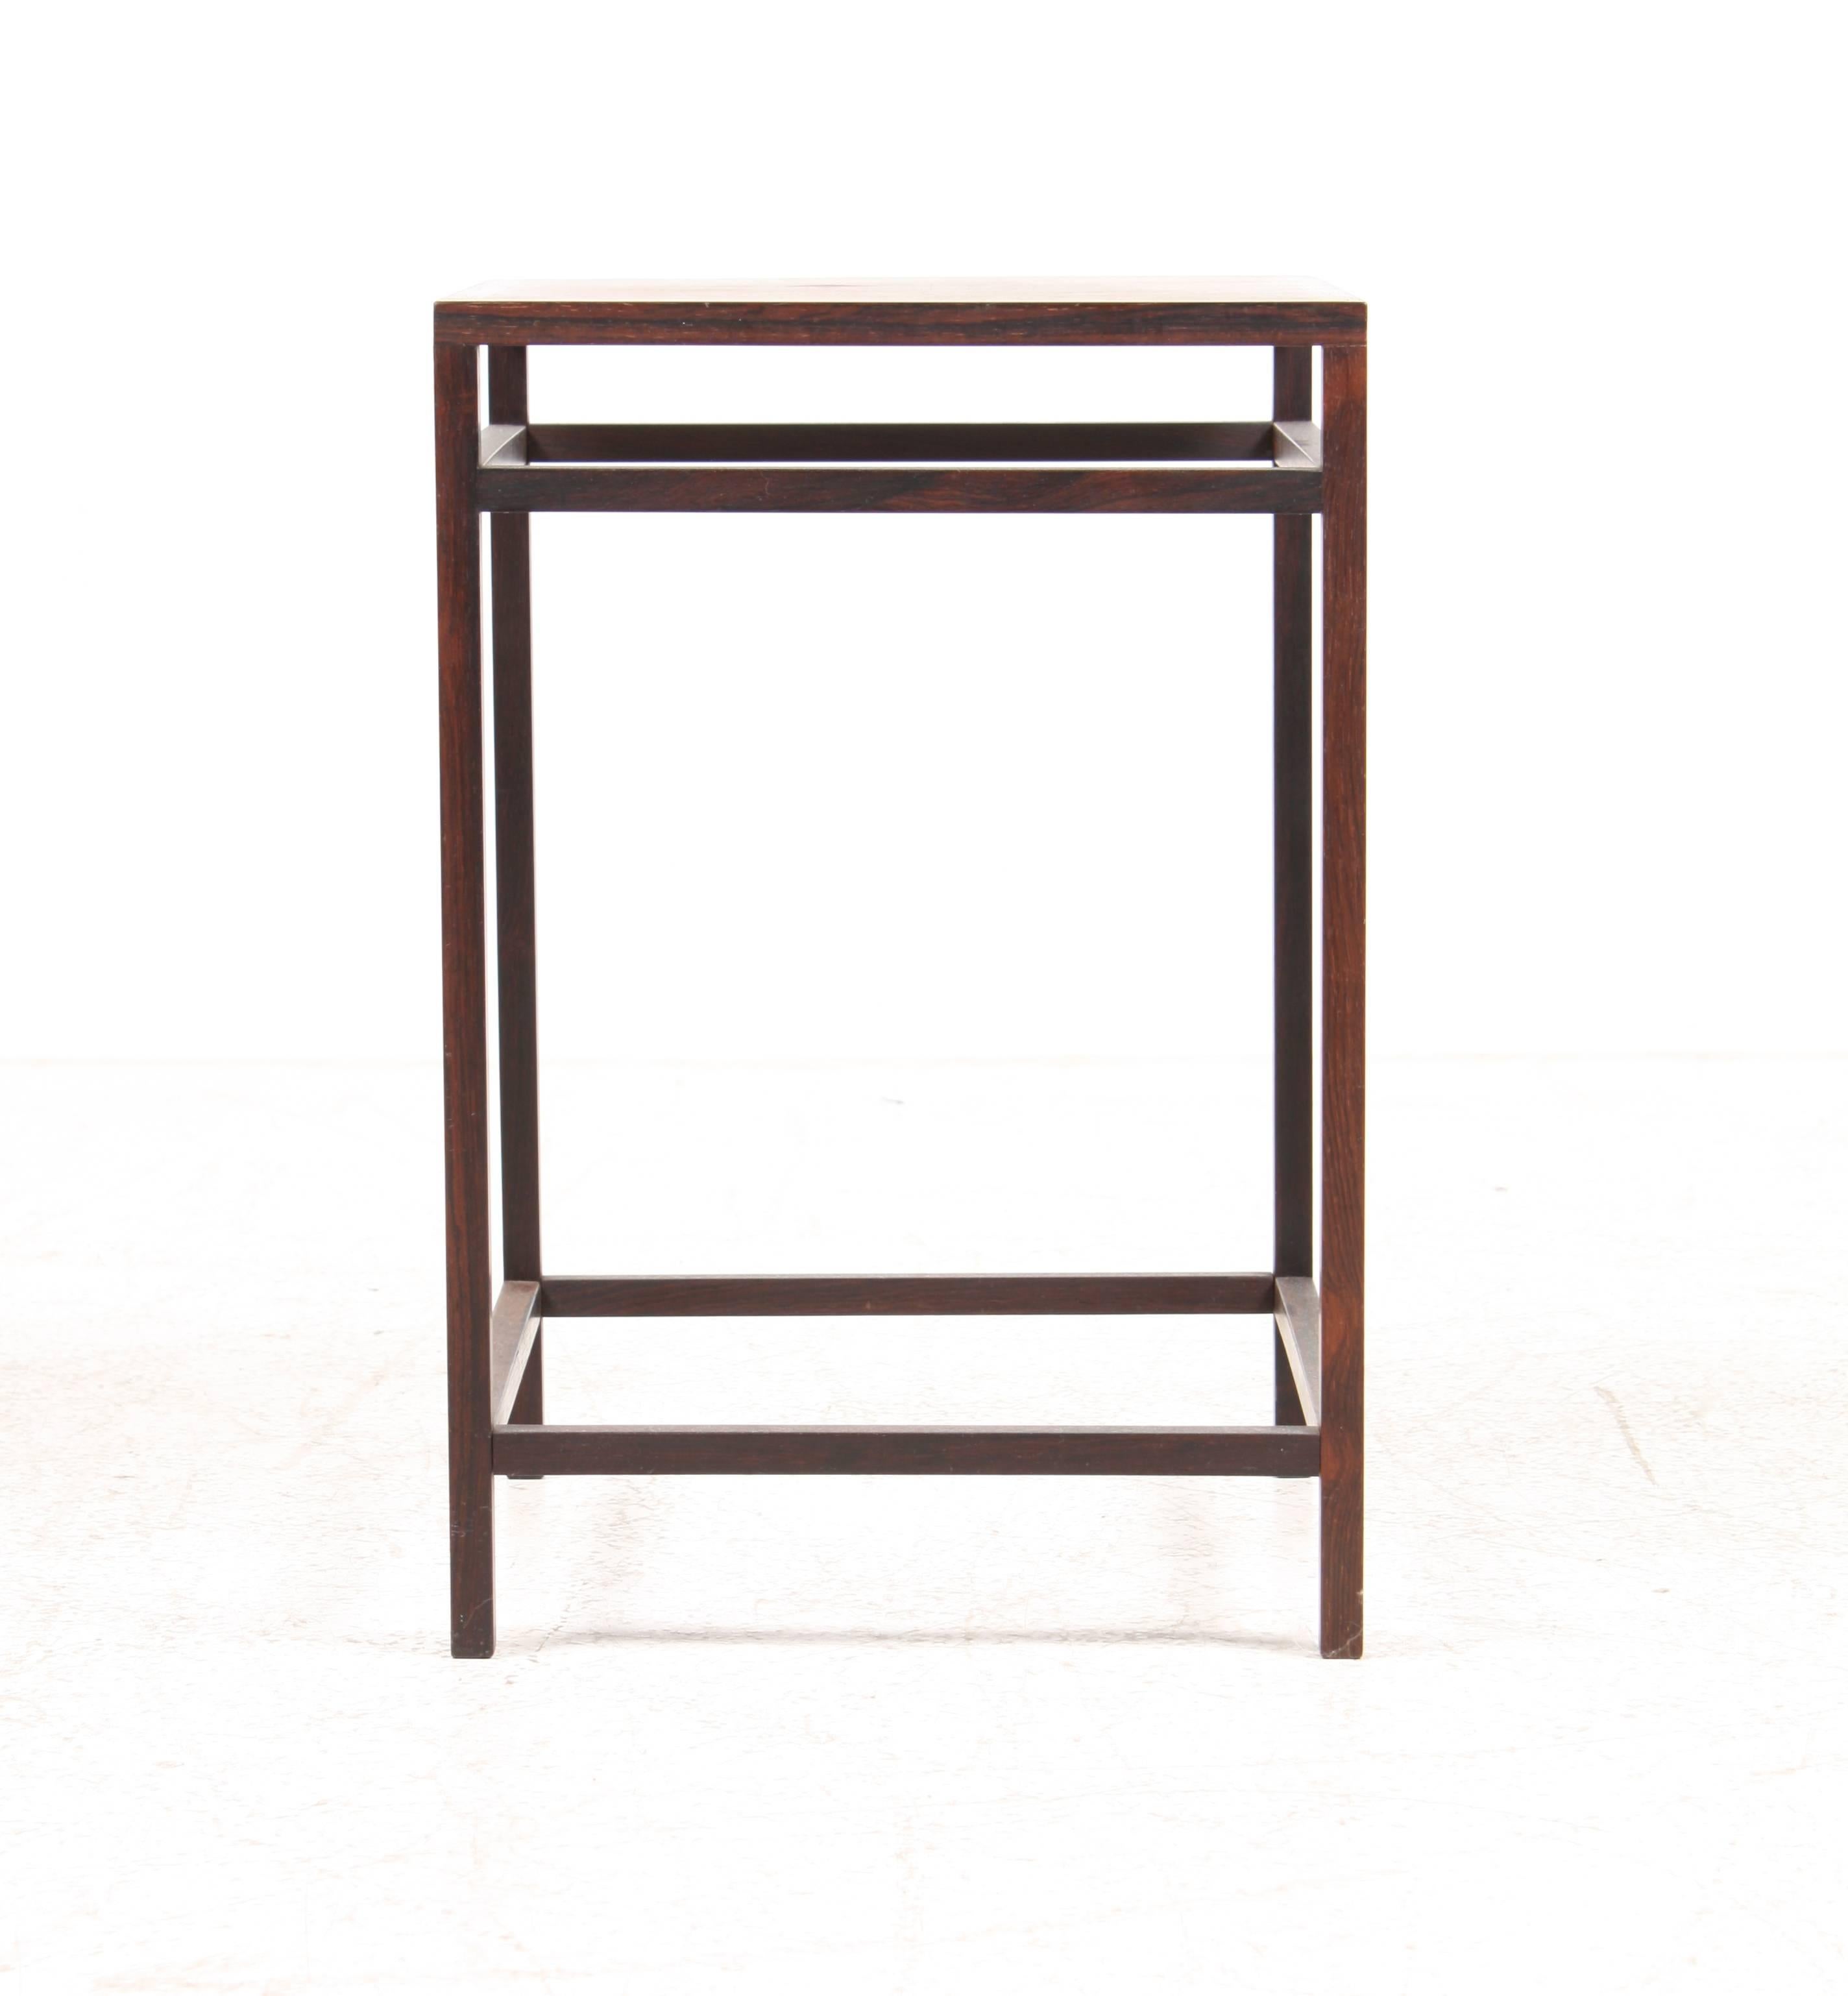 Side table in Brazilian rosewood designed by Ejner Larsen and Aksel Bender Madsen for Willy Beck Cabinet Makers Copenhagen. Made in Denmark in the 1950s. Great original condition.